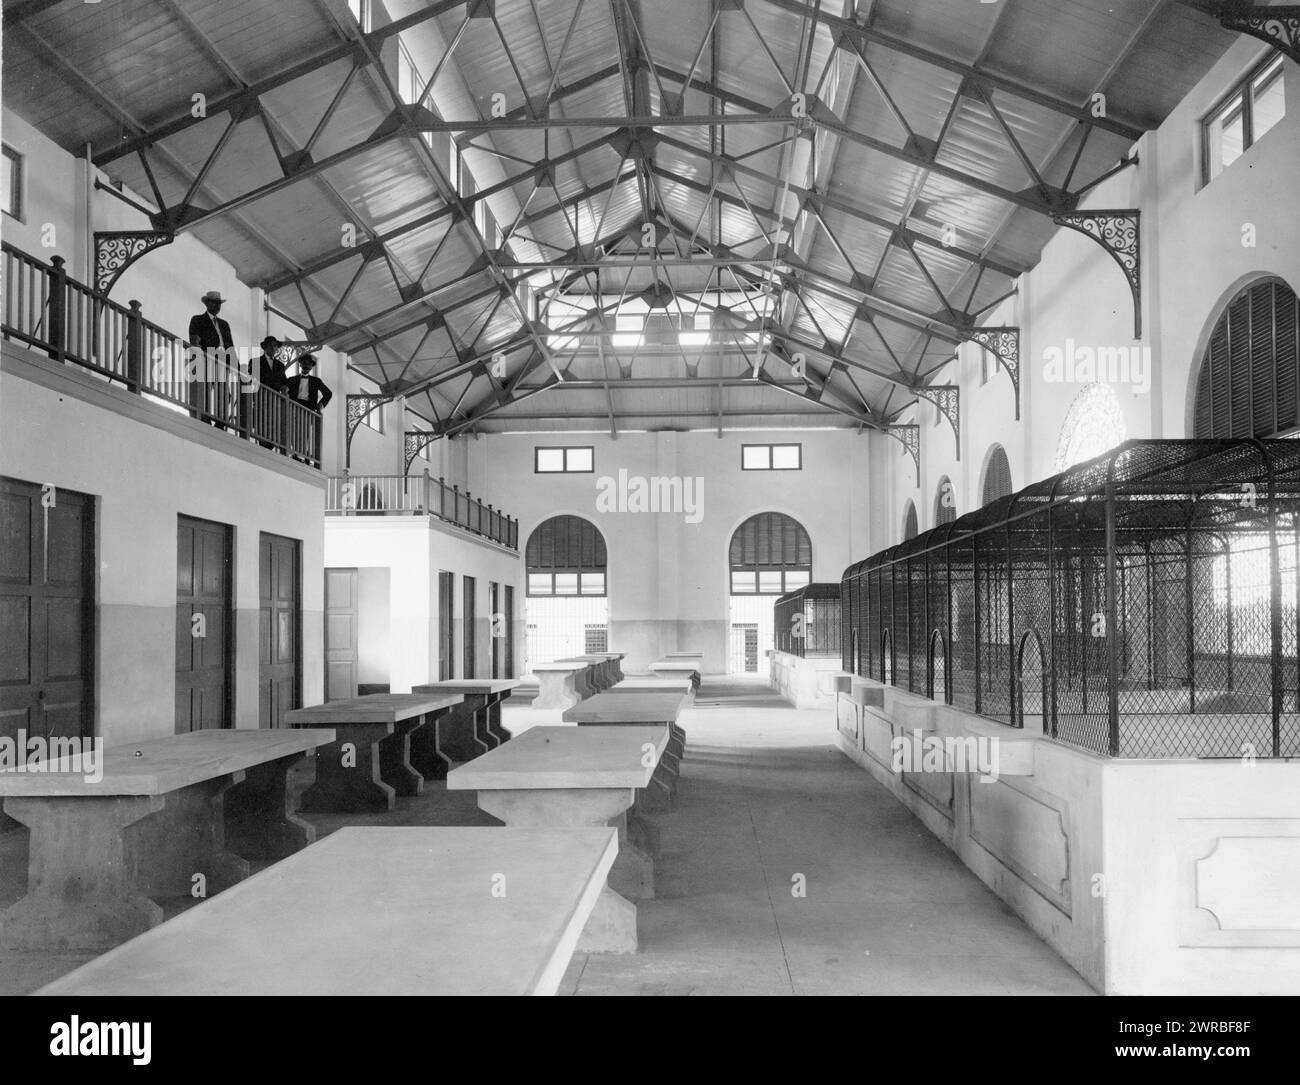 New public market, San Juan, Puerto Rico, Interior view of new building, empty except for three men observing from gallery., between ca. 1890 and 1923, Markets, Puerto Rico, San Juan, 1890-1930, Photographic prints, 1890-1930., Photographic prints, 1890-1930, 1 photographic print Stock Photo